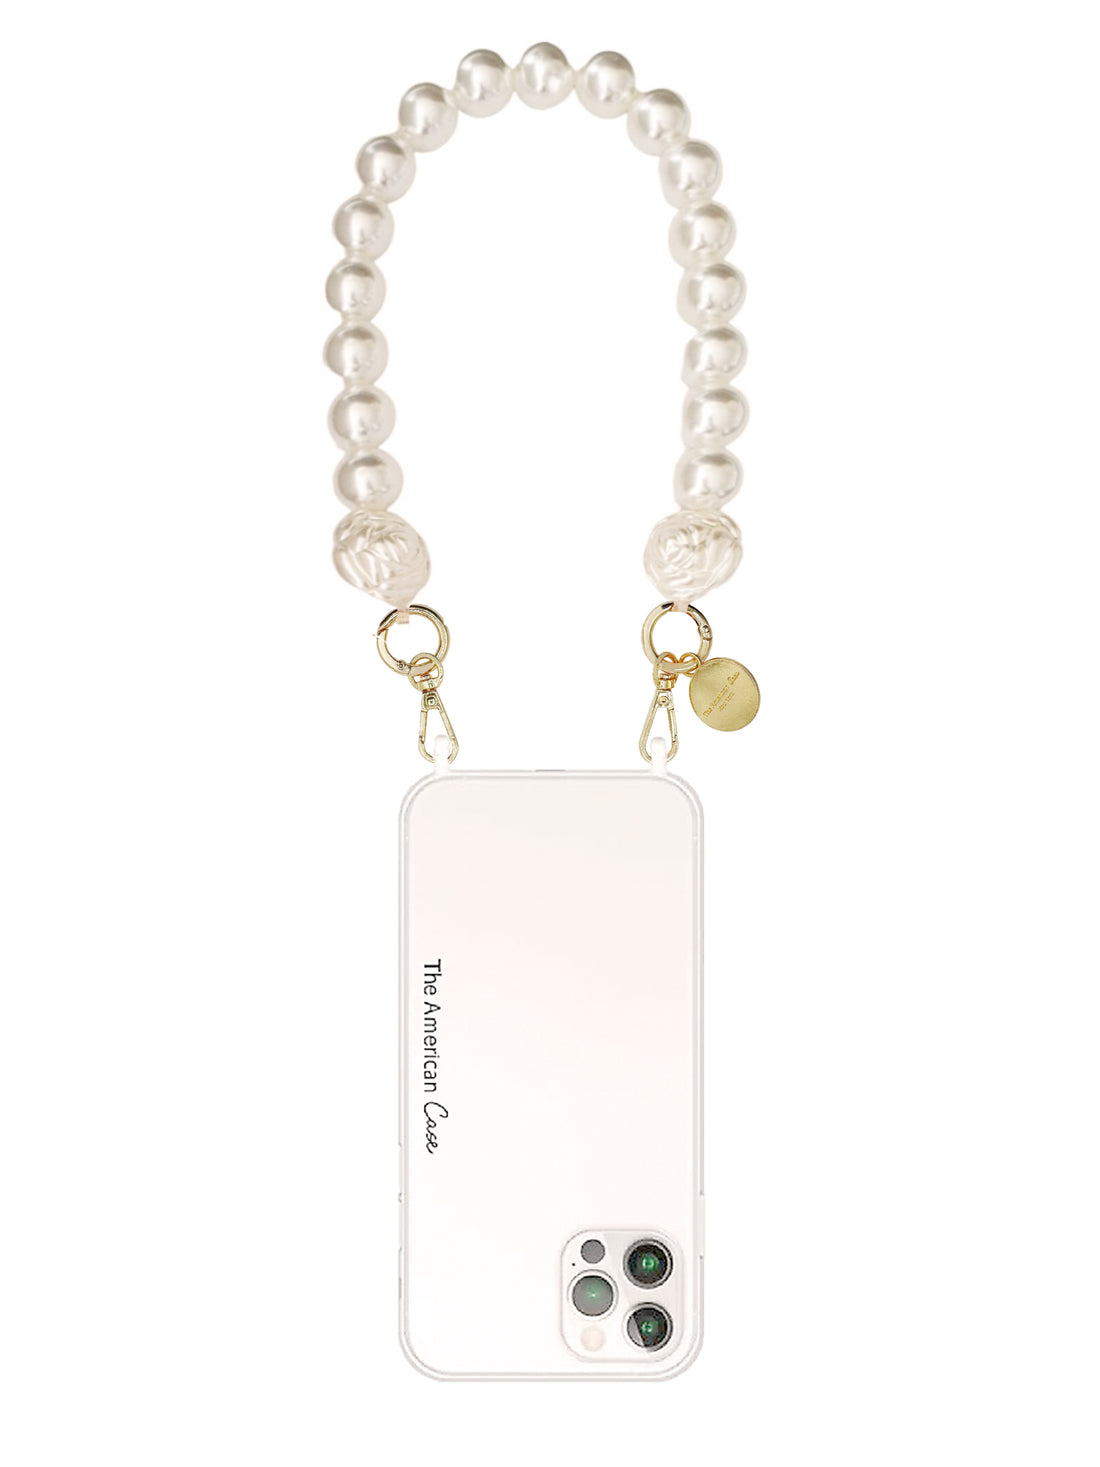 Rosie - Pearl and Rose Shape Beads Bracelet Phone Chain with Golden Carabiners